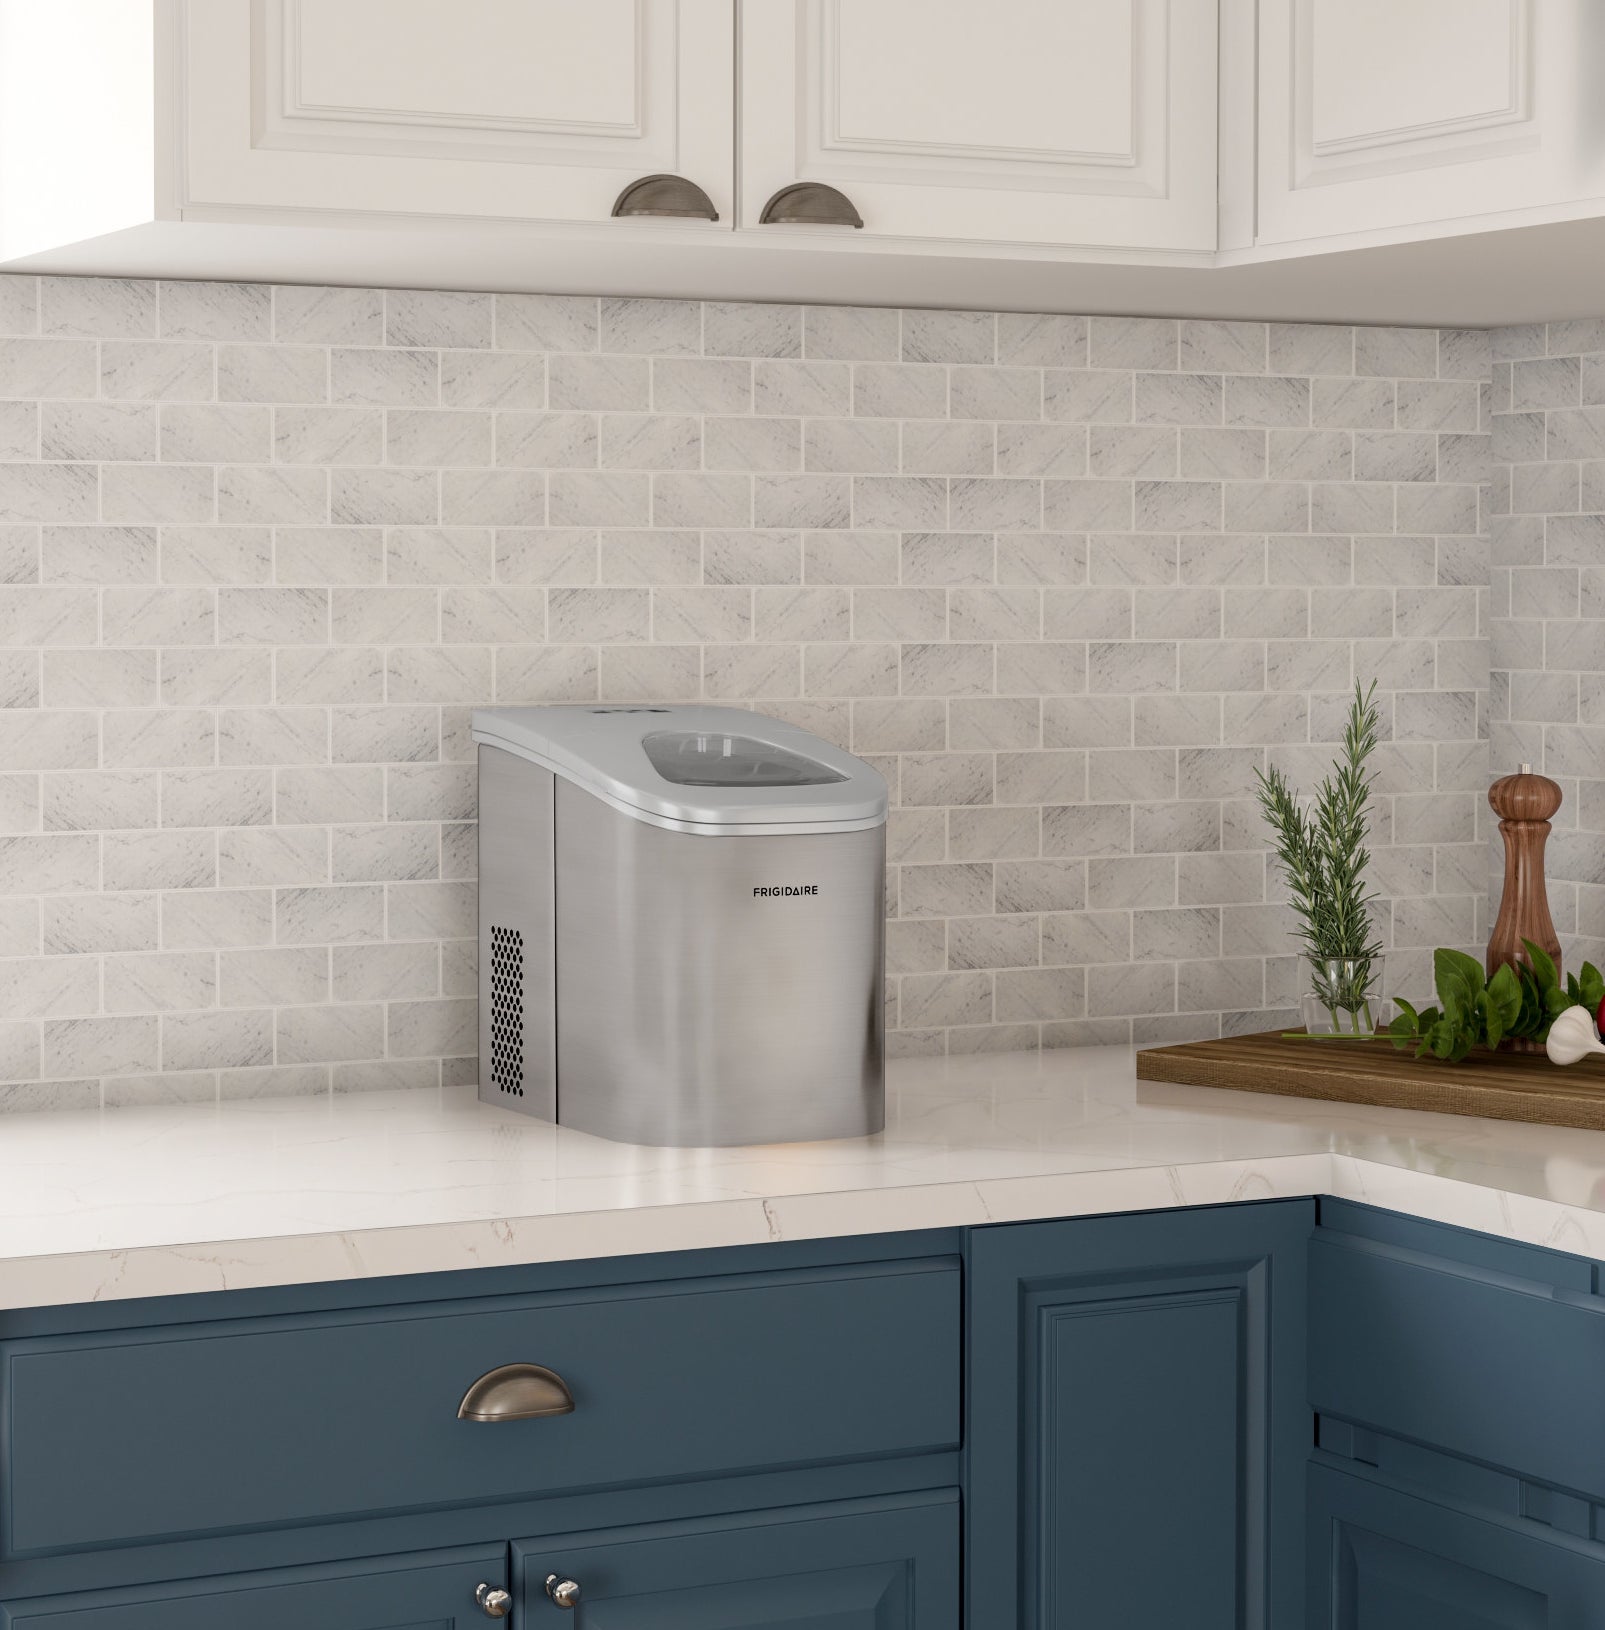 silver ice maker on a counter